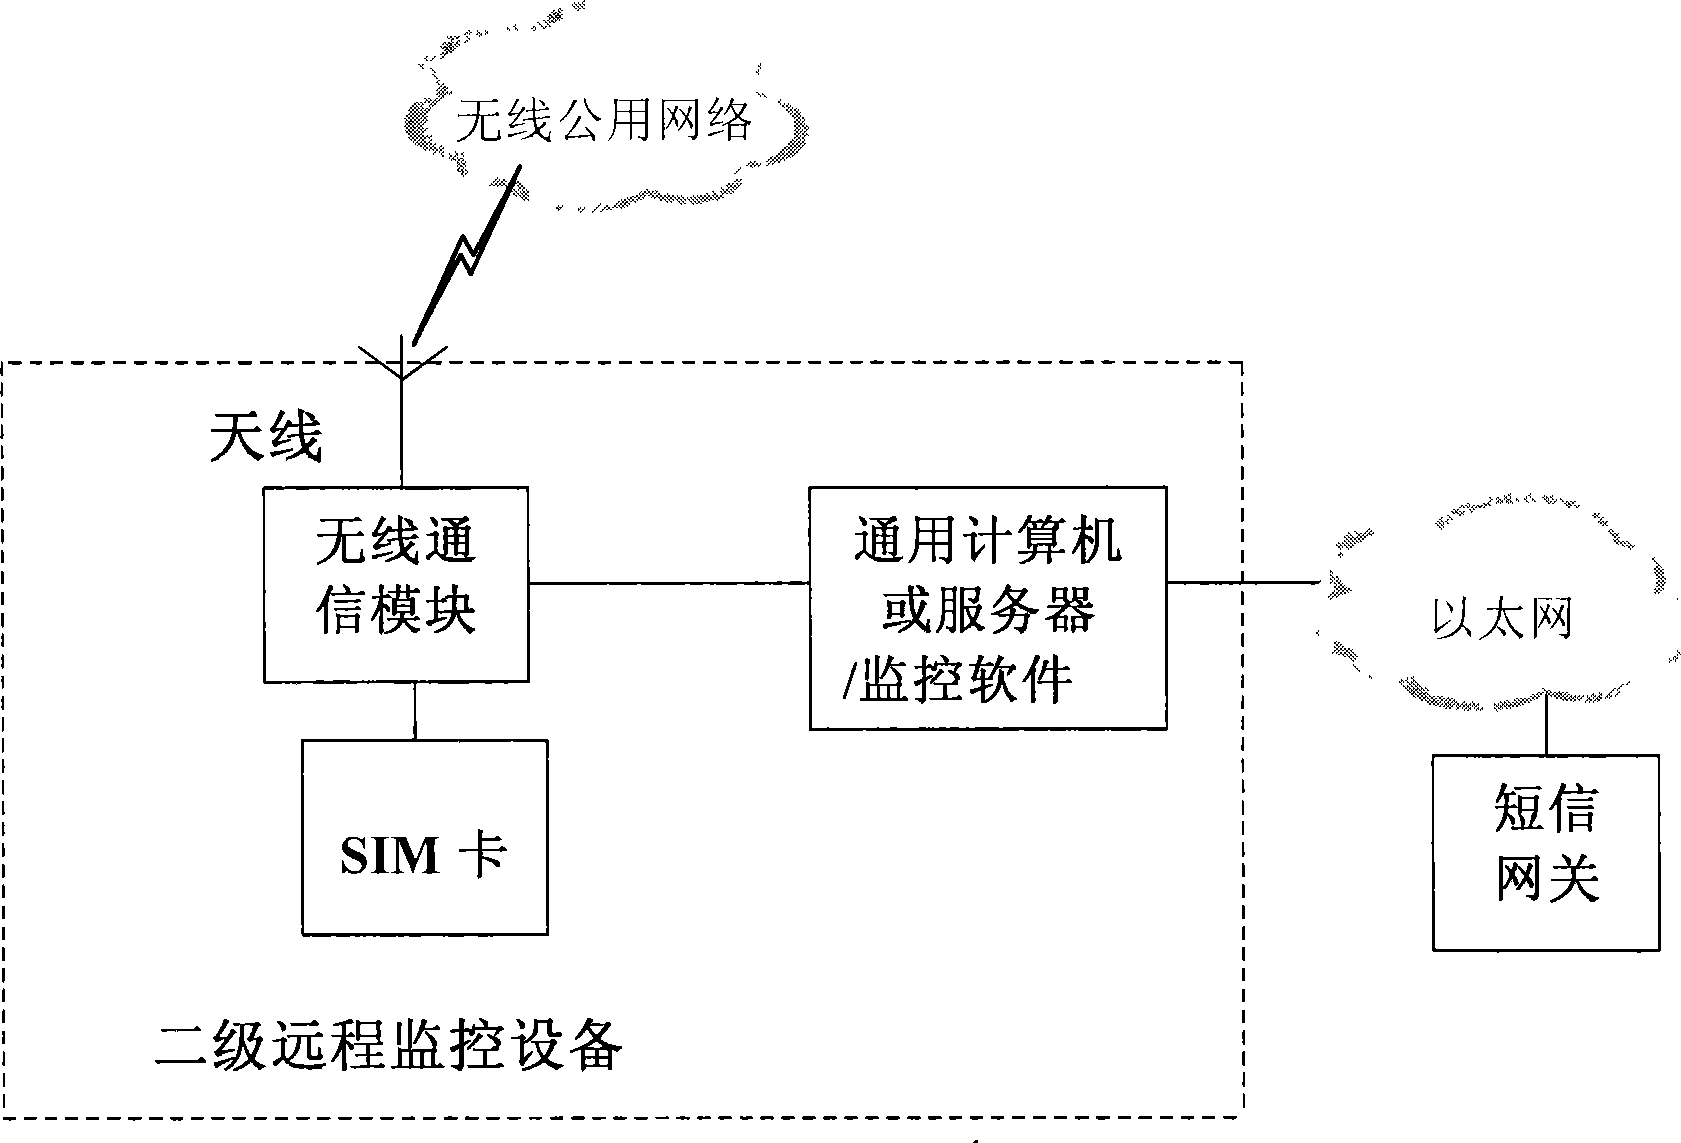 Remote centralized monitoring system and method for tobacco flue-curing house